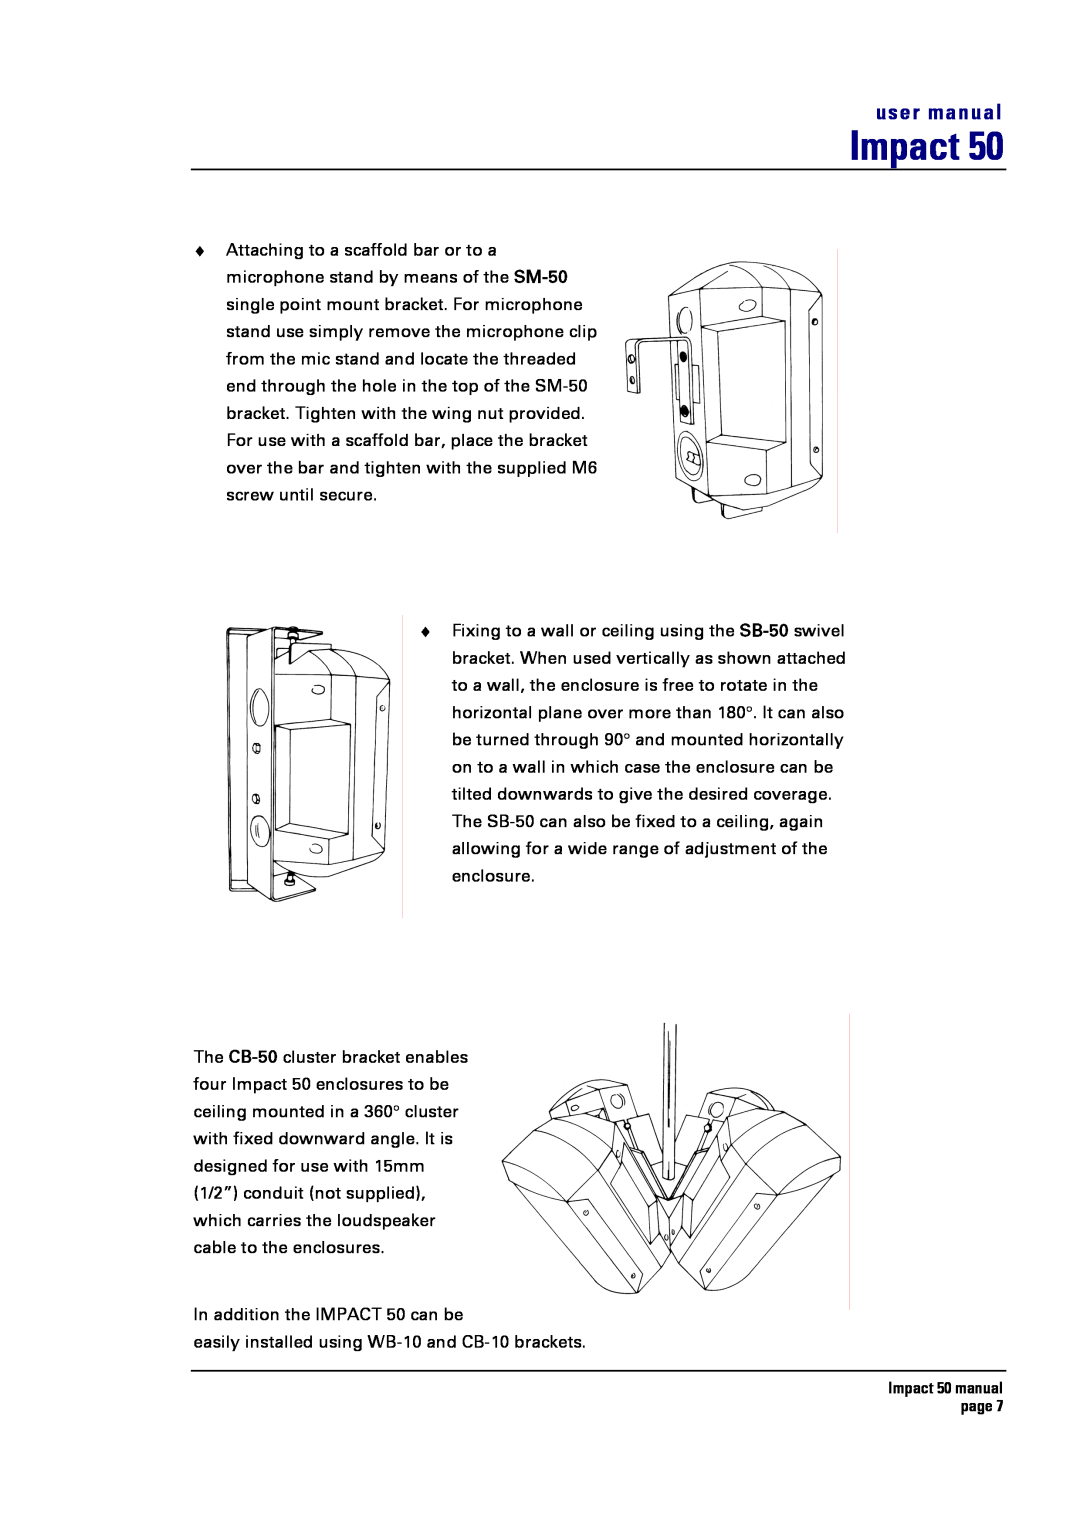 Turbosound 50T user manual Impact, In addition the IMPACT 50 can be 